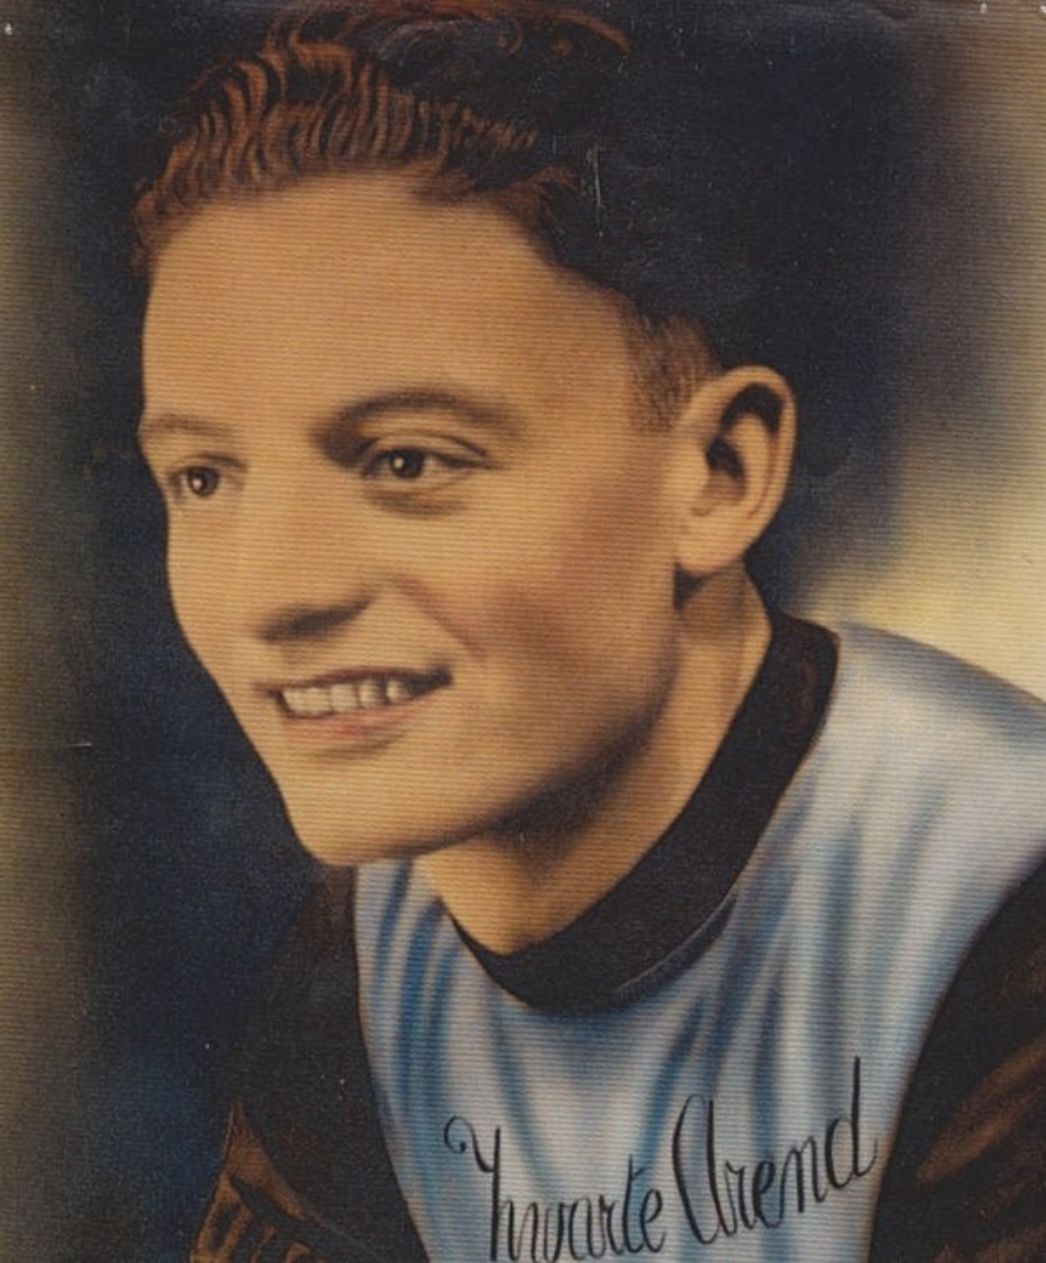 Portrait photo of Frans Hotag. He is smiling.